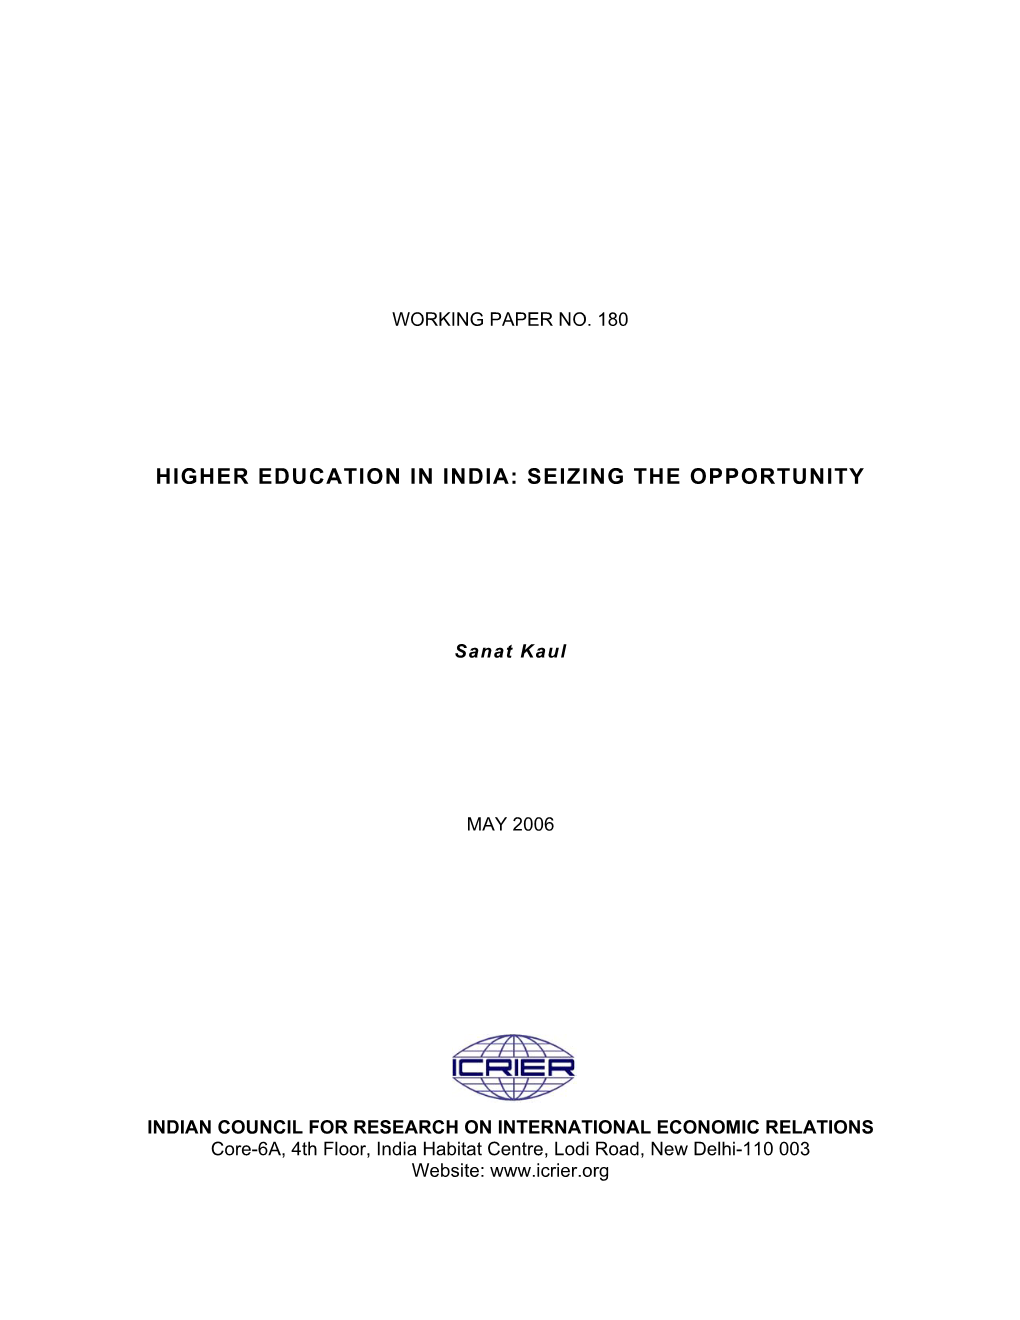 Higher Education in India: Seizing the Opportunity